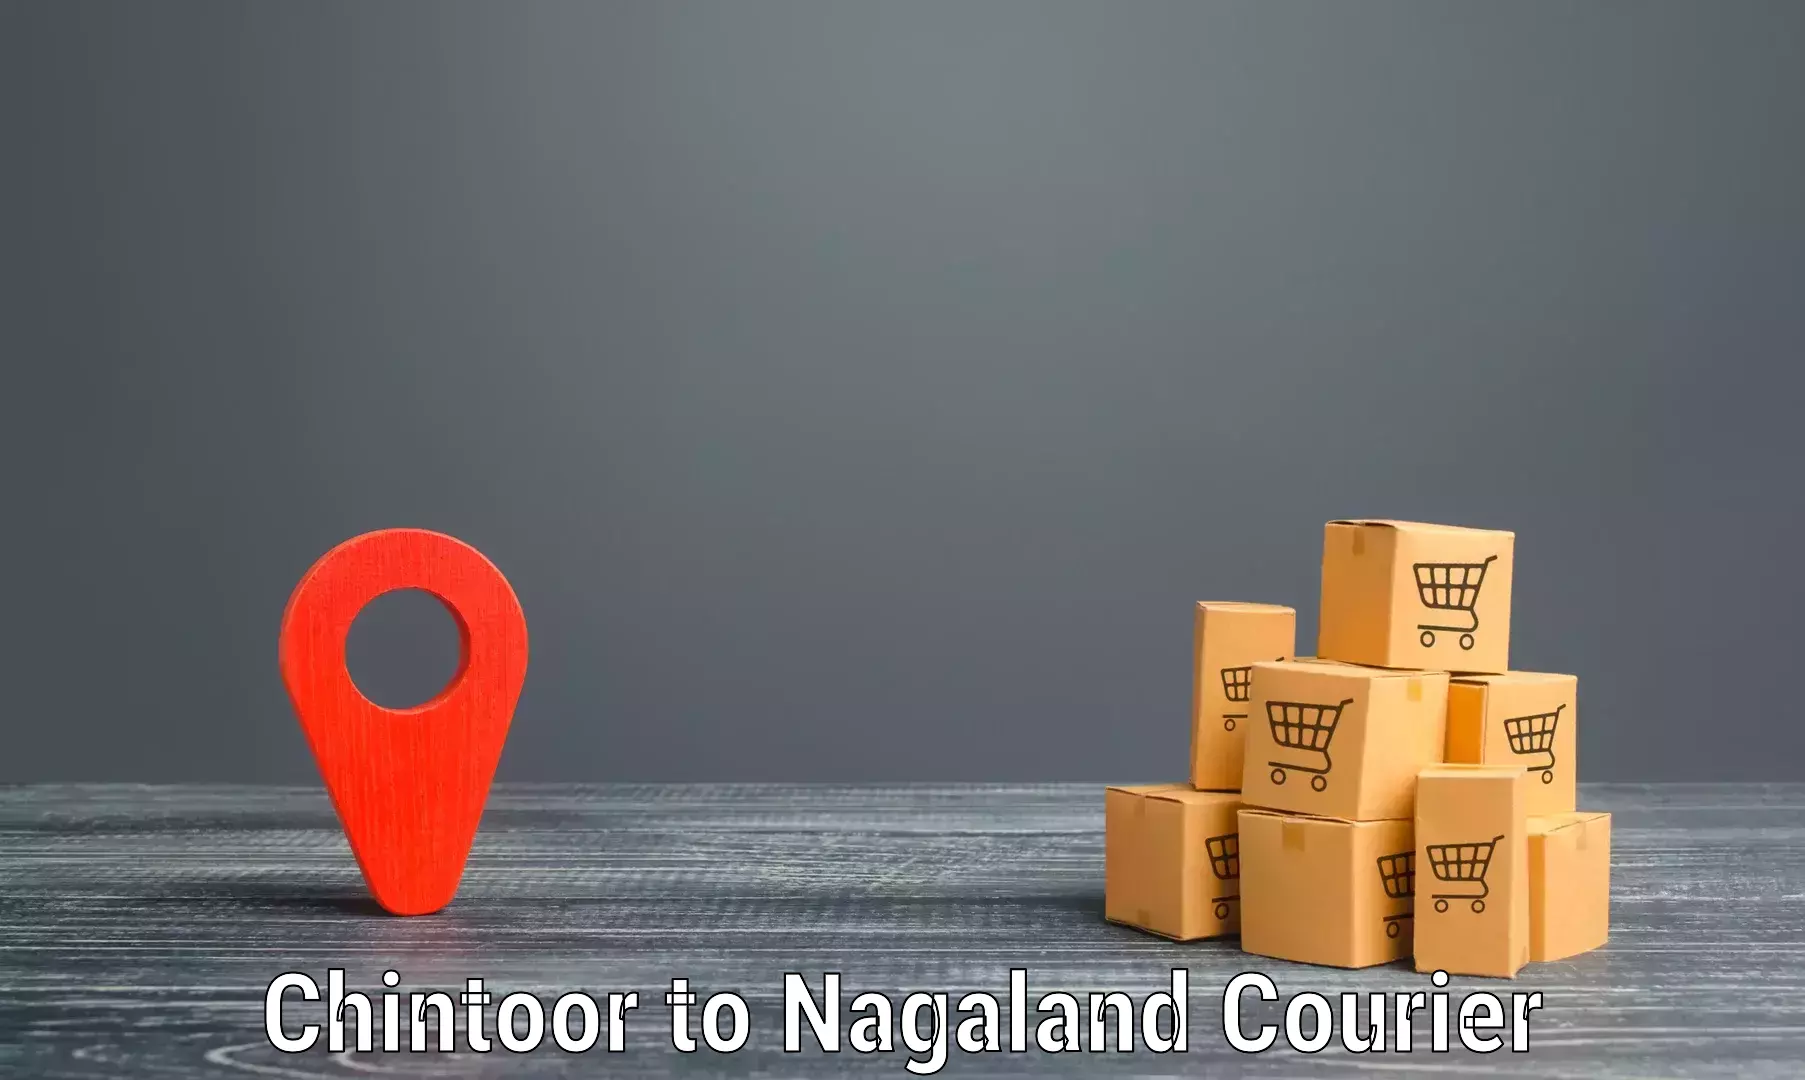 Courier service partnerships Chintoor to Nagaland